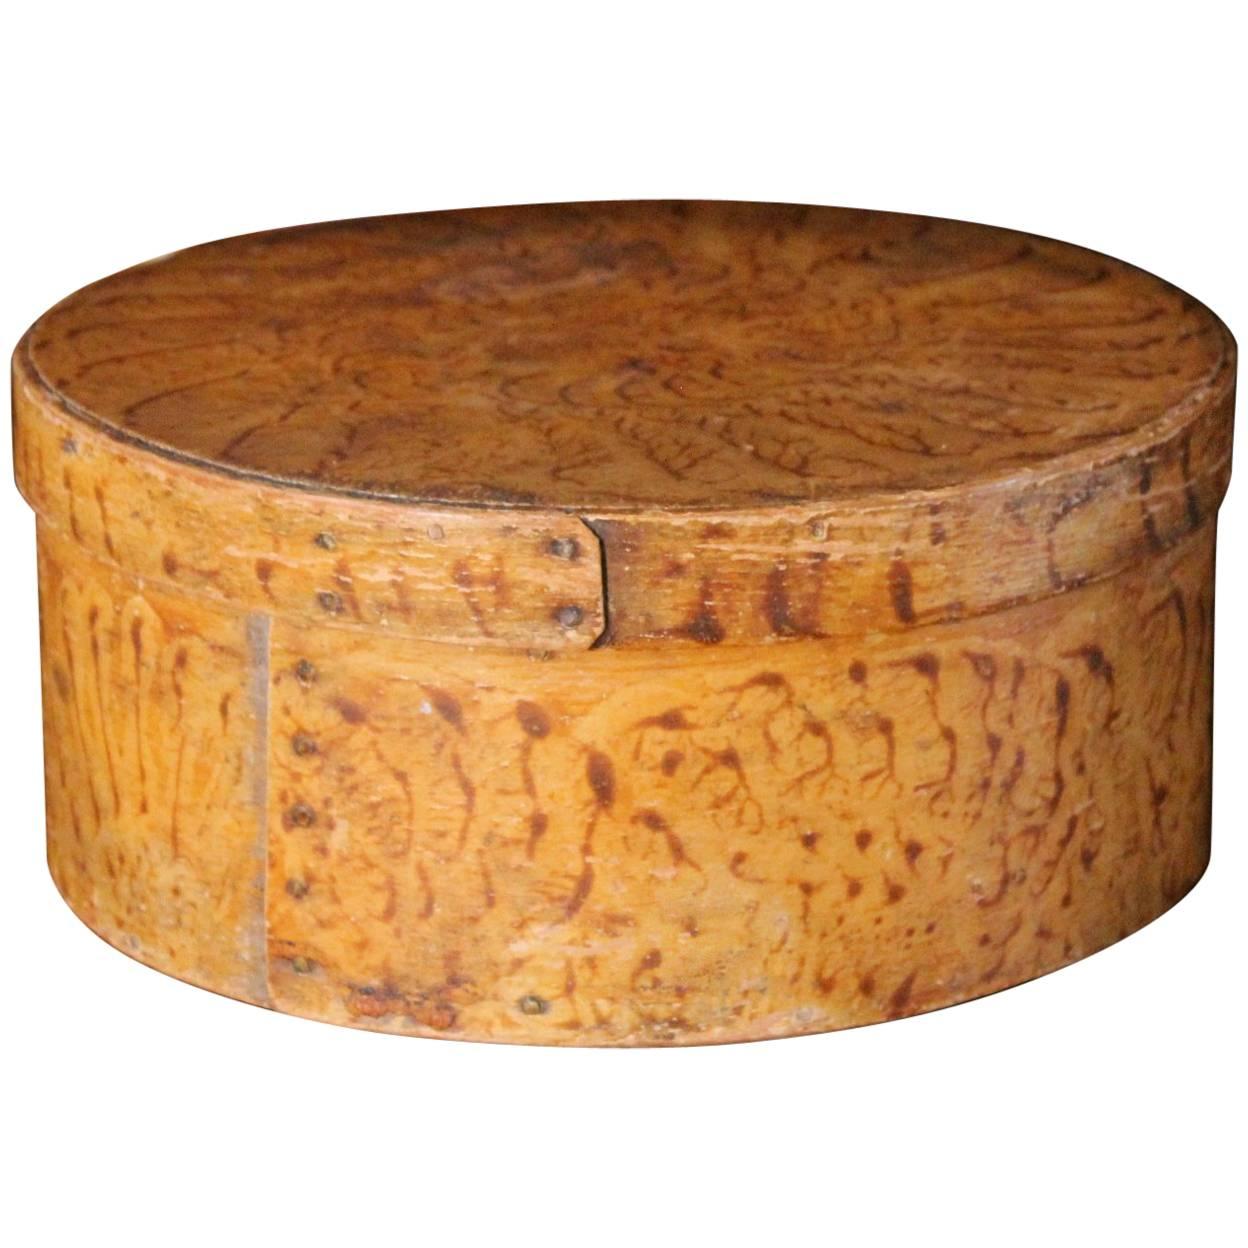 Grain-Painted Maple and Pine Round Covered Storage Box